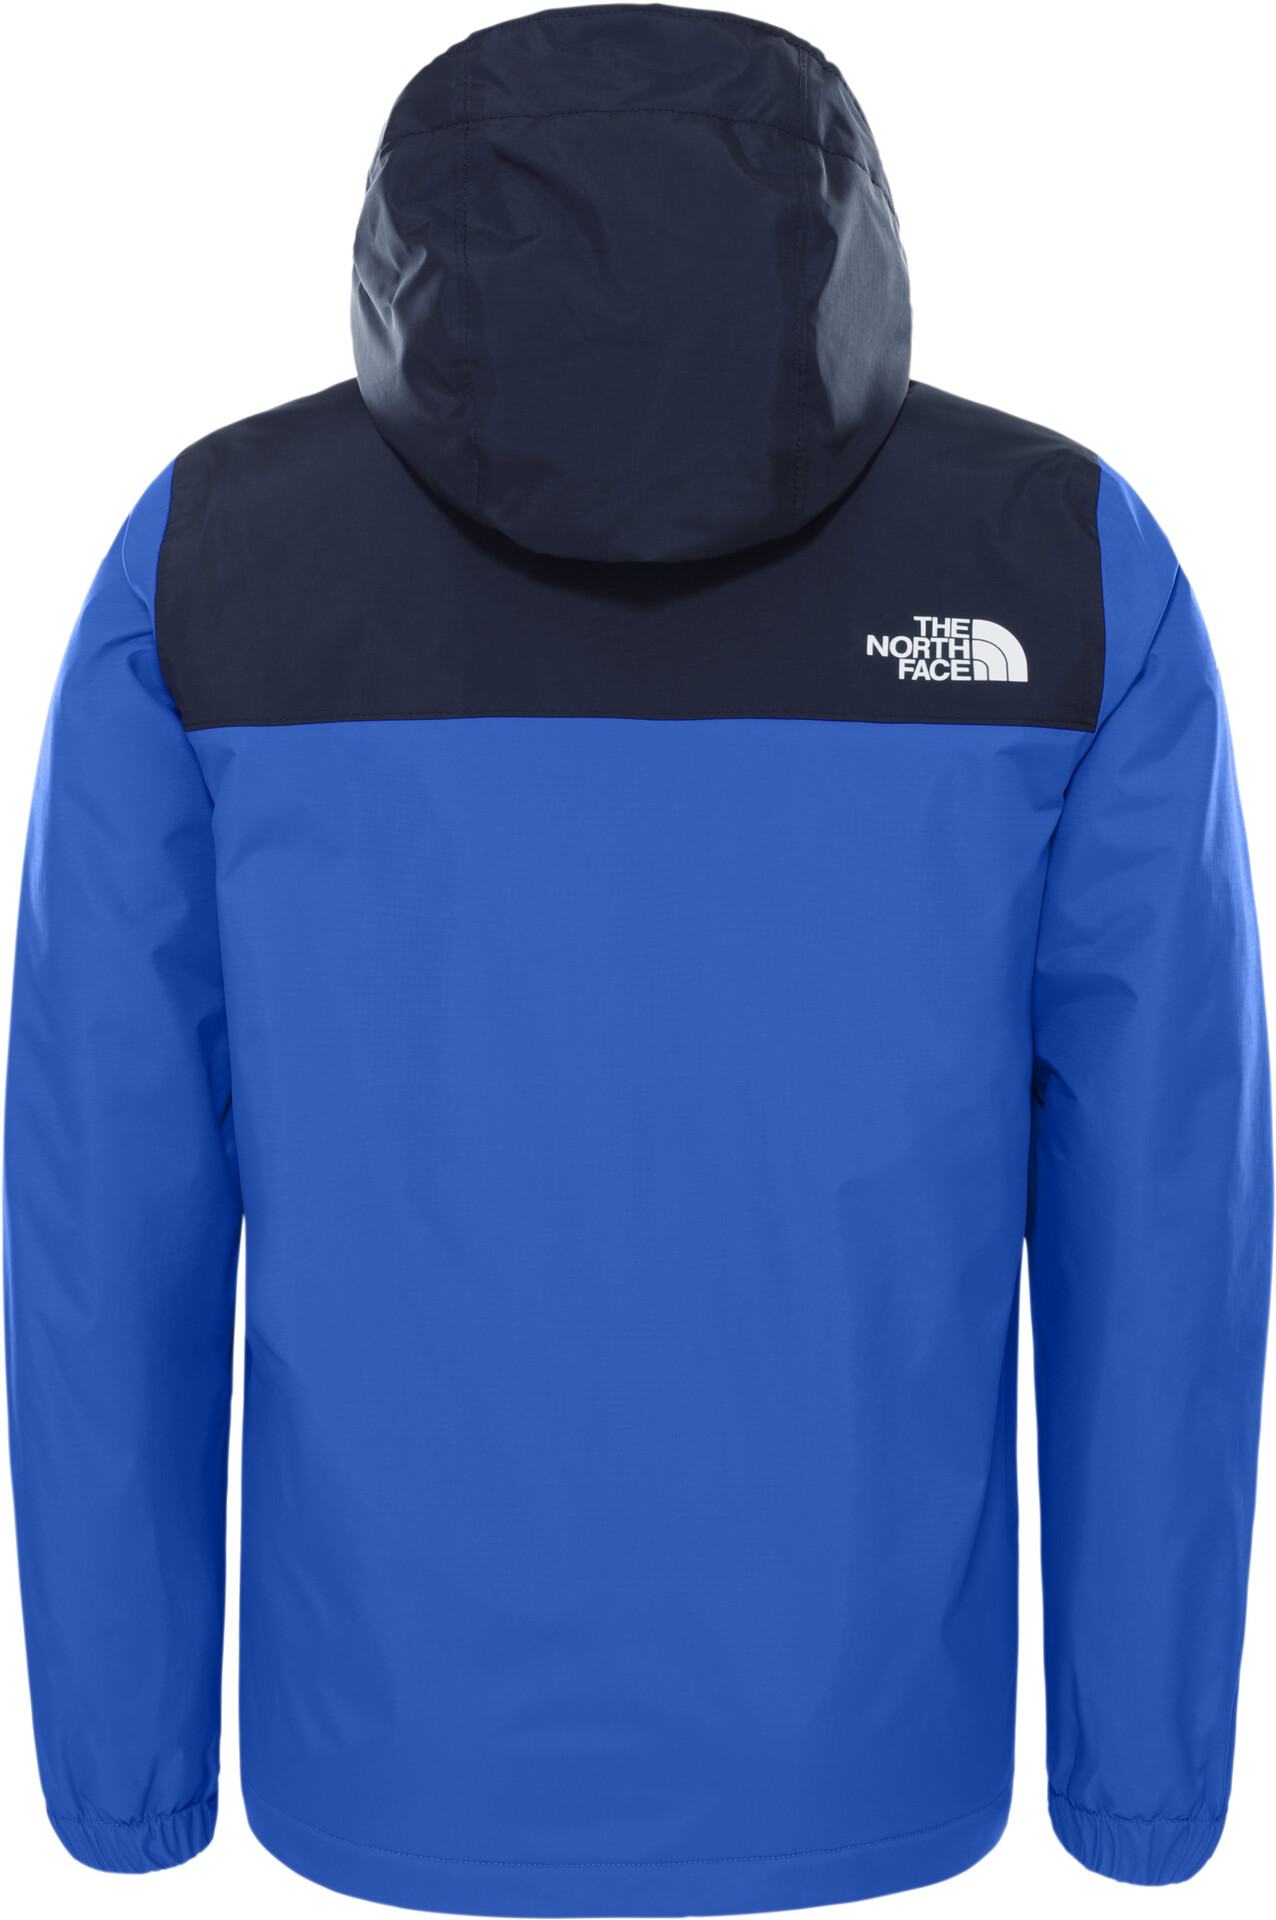 the north face storm blue